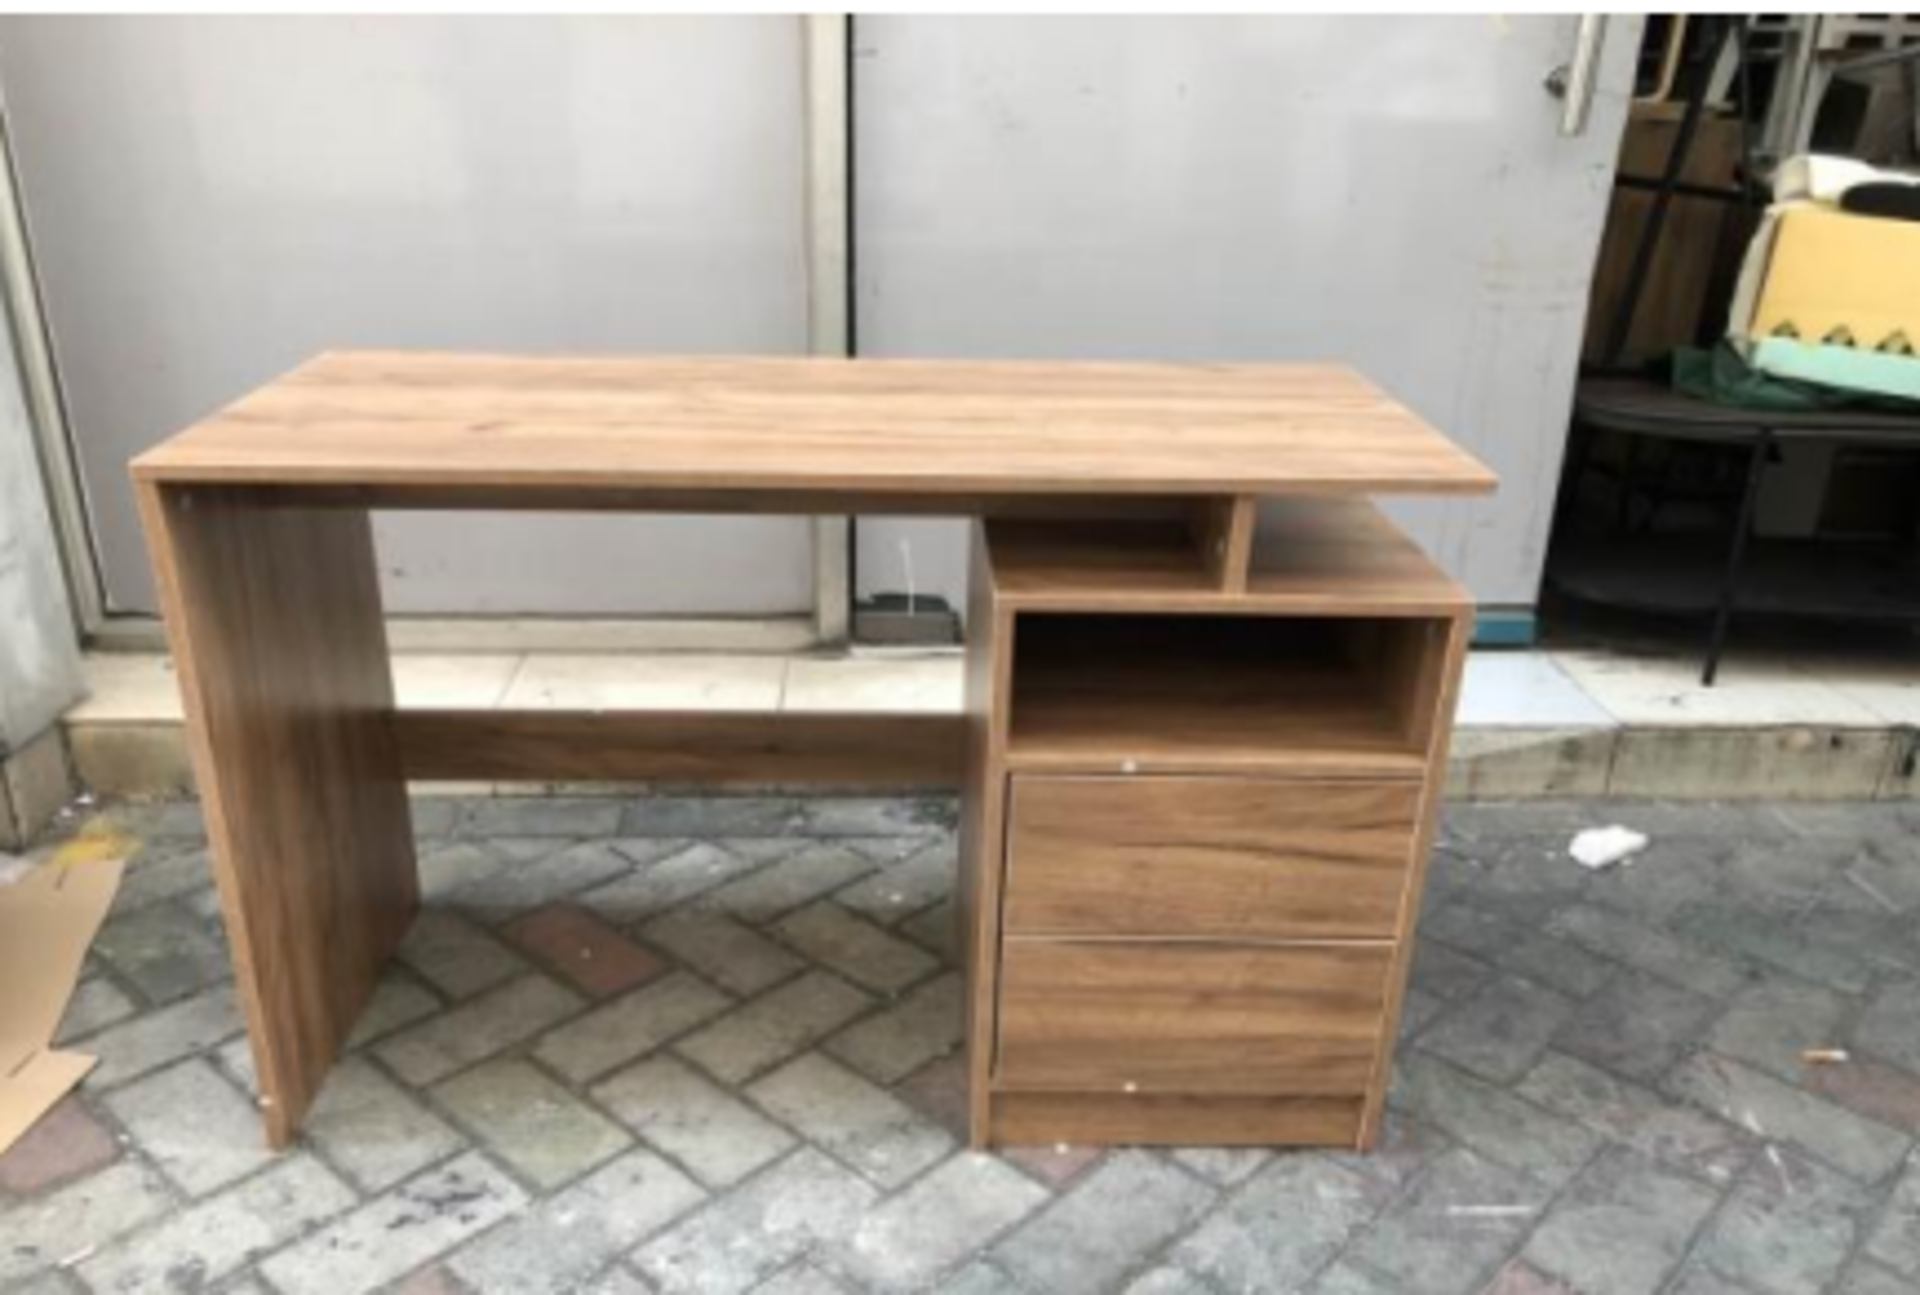 BRAND NEW TWO DRAWING COMPUTER DESK WOOD GRAIN COLOUR RRP £279 (2583)